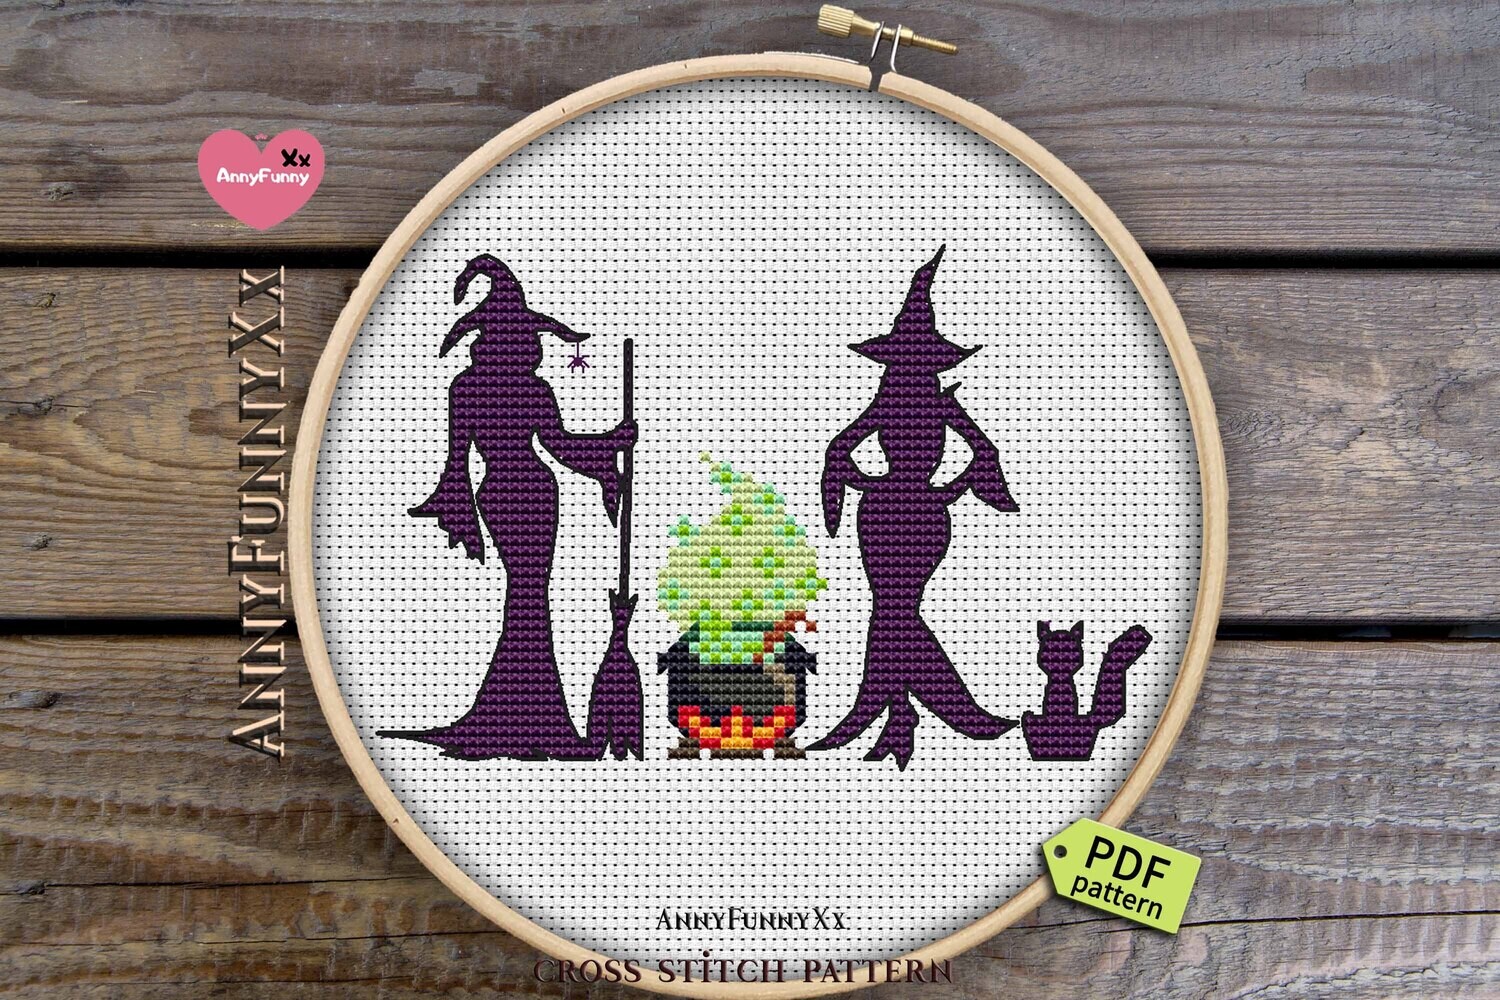 Witch with cat Halloween cross stitch pattern PDF, Witches embroidery design handmade, Wicca goth Witchcraft autumn black cat lover gift